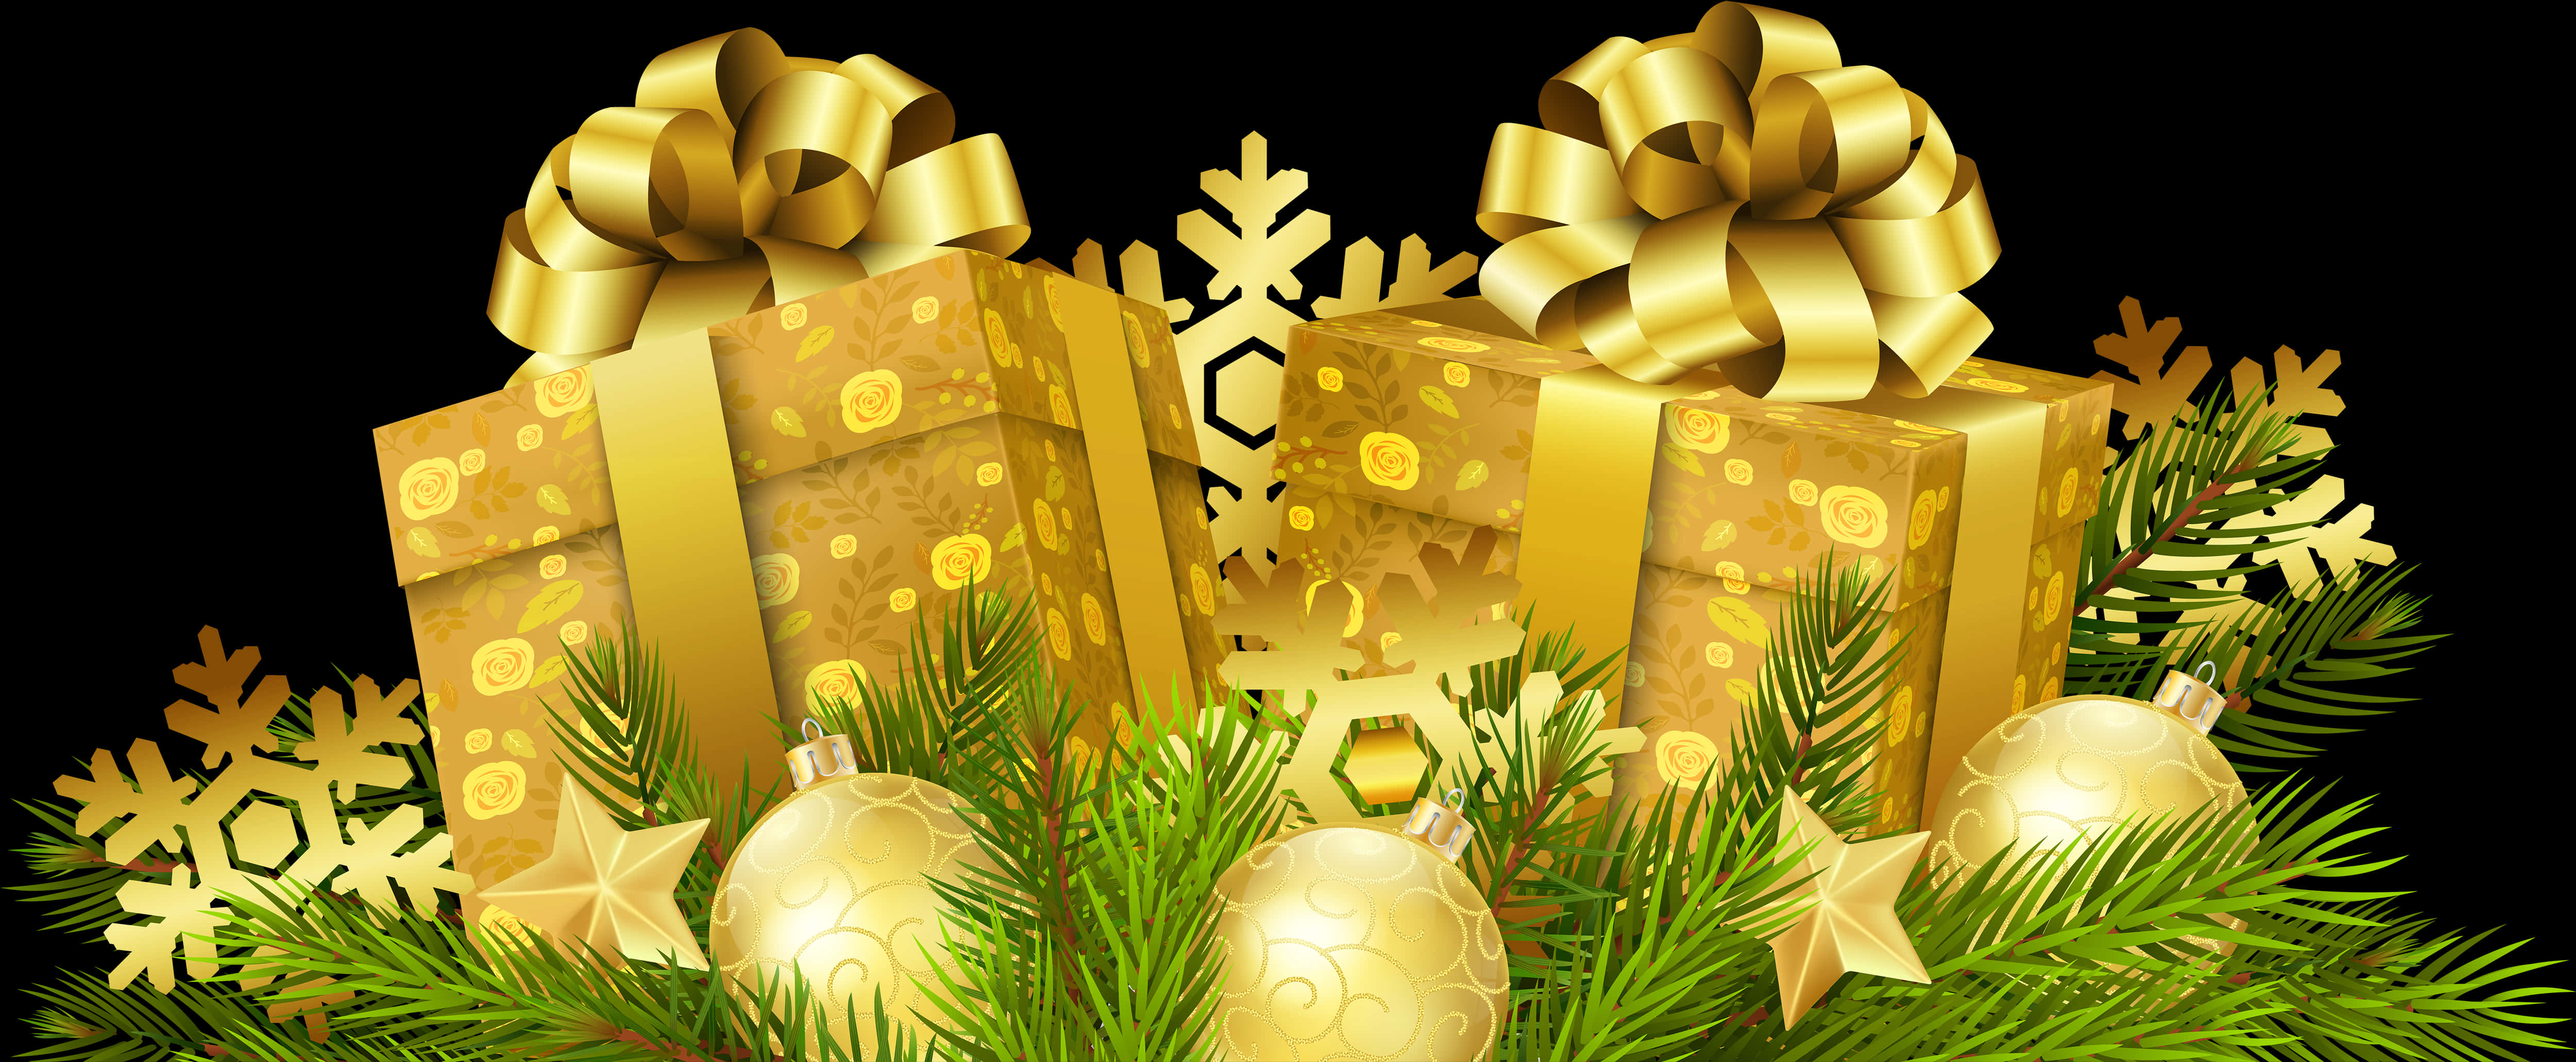 Christmas Gifts Decoration Transparent Png Clip Art - Transparent Background Christmas Gift Png, Png Download